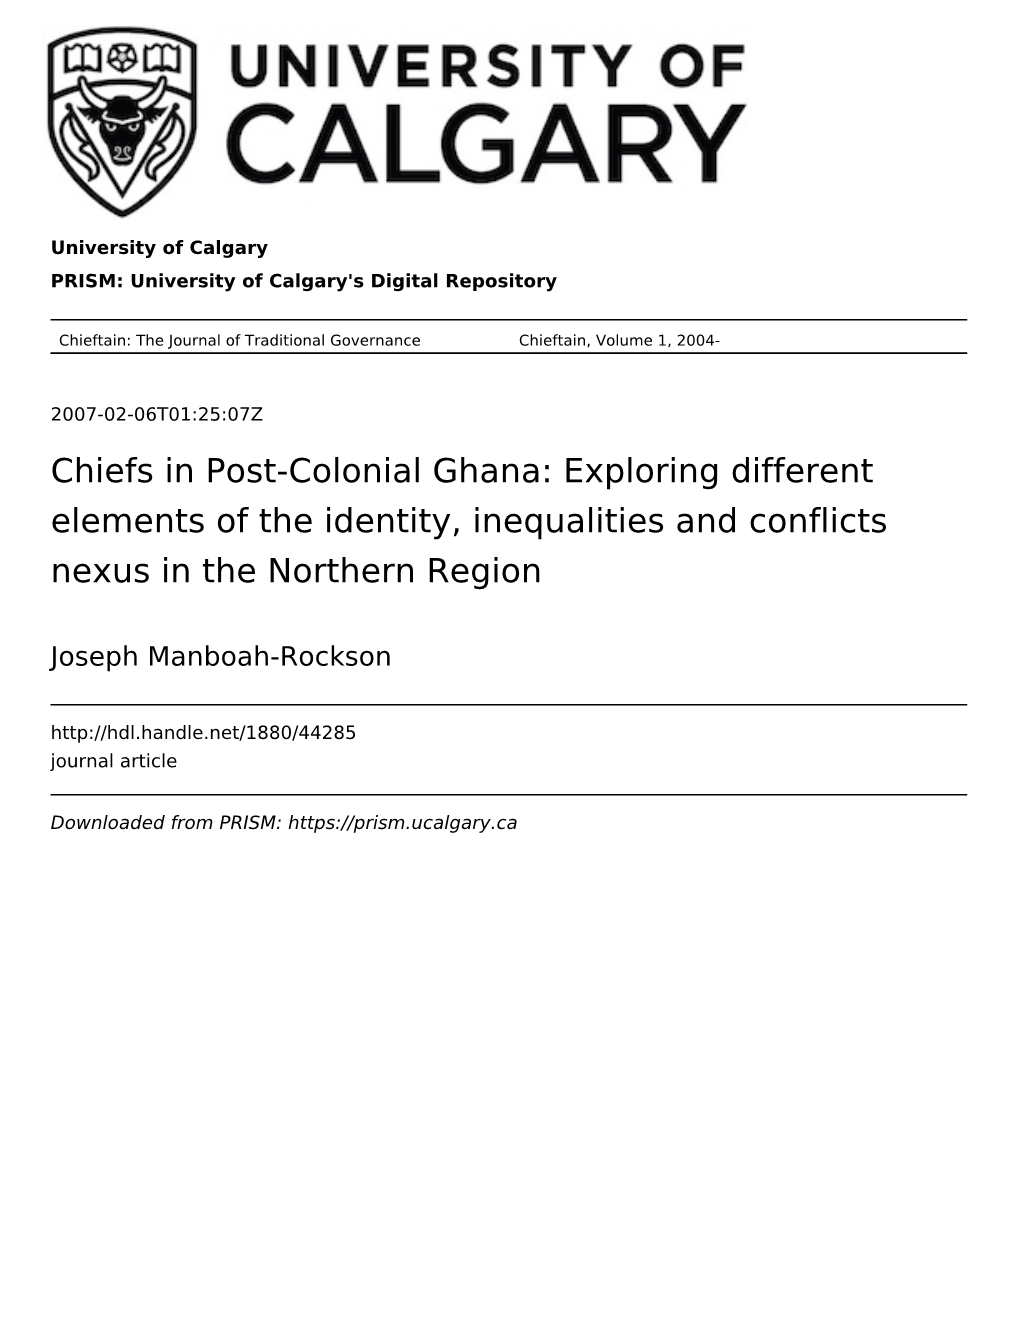 Chiefs in Post-Colonial Ghana: Exploring Different Elements of the Identity, Inequalities and Conflicts Nexus in the Northern Region